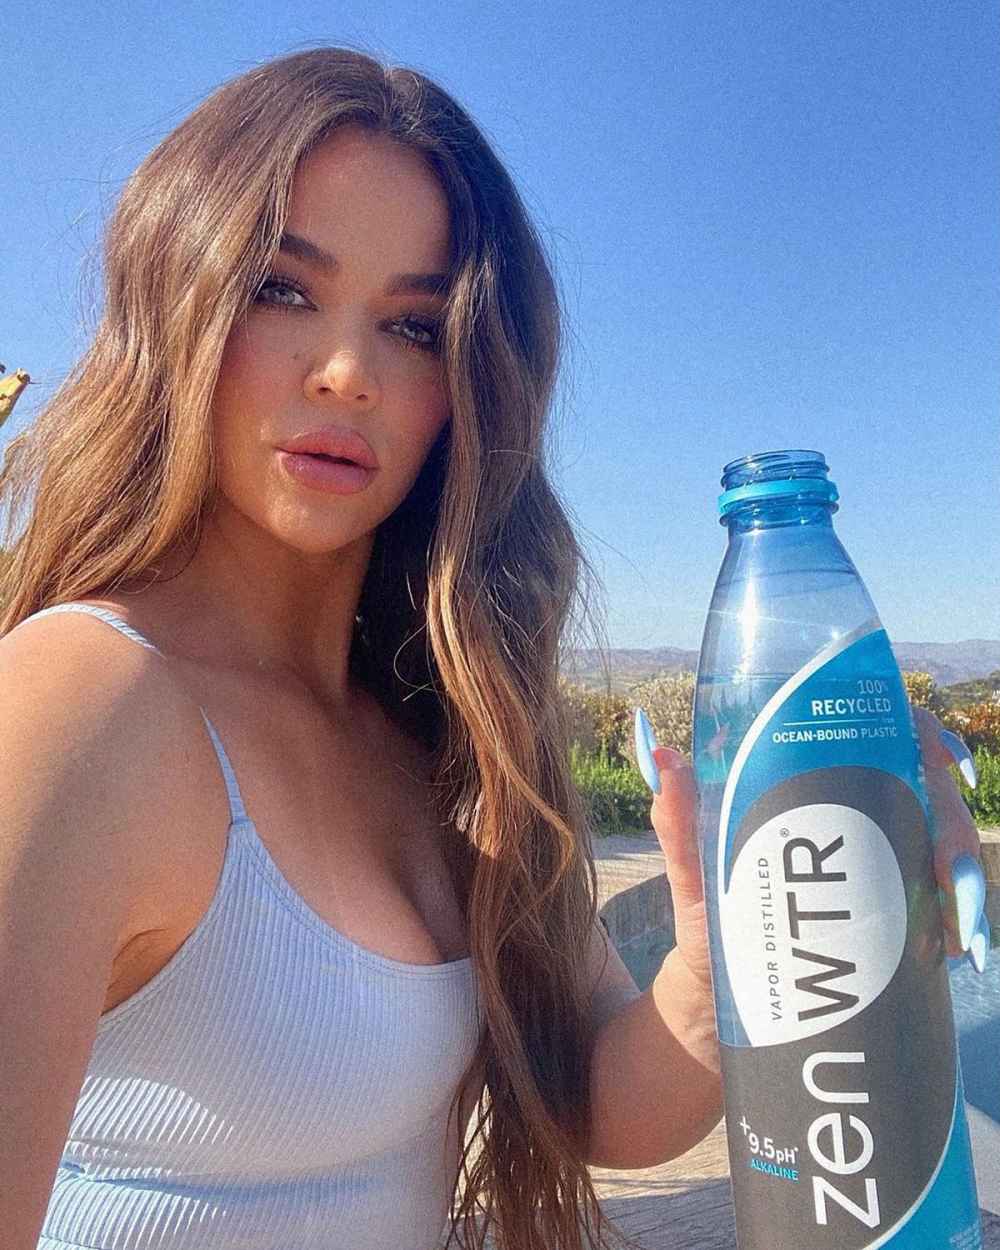 Khloe Kardashian Responds to Criticism About Her Plastic Water Bottle Comments: ‘People Turn Nothing Into Something'